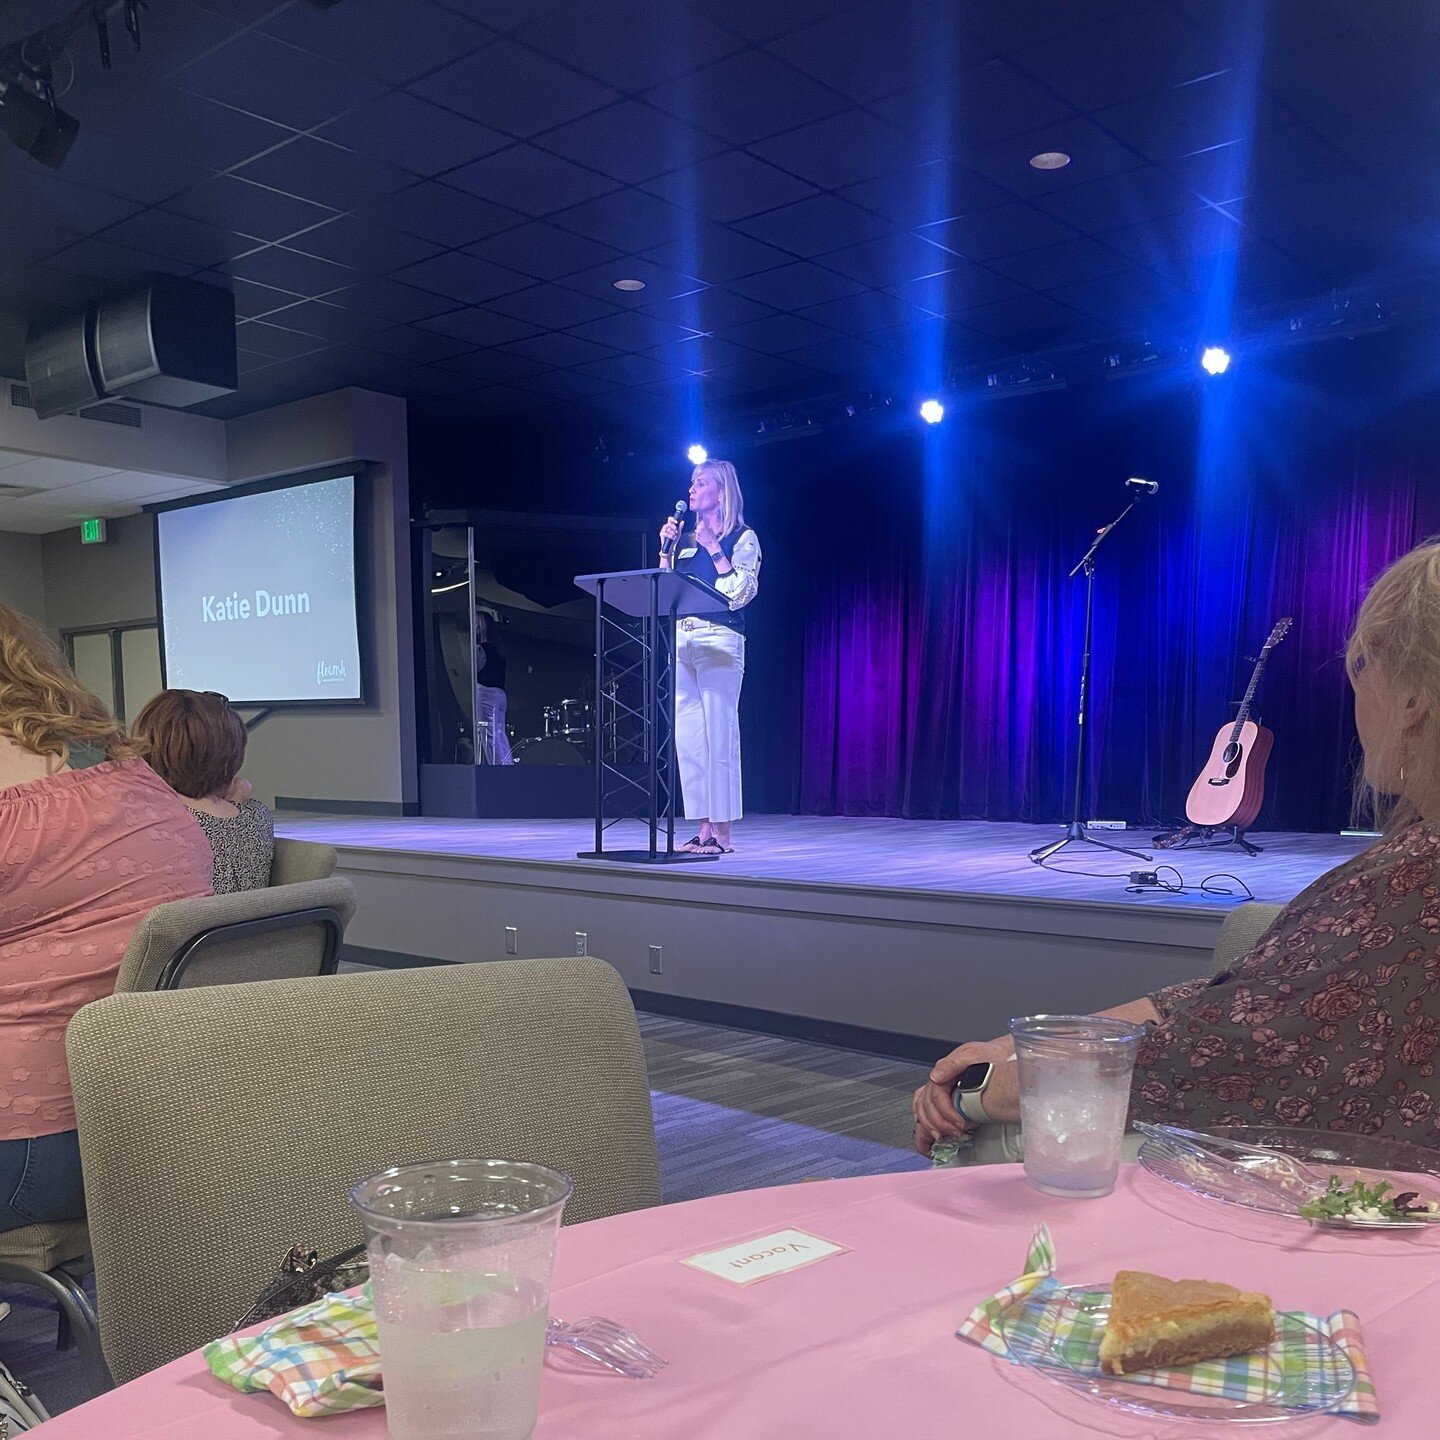 You may not know this...⁠
⁠
but we kind of love stories around here&mdash;which is why we are so passionate about helping women discover theirs! Last weekend, Katie (@katietdunn) spoke to a local church's women's ministry (@greenvalleybc) about the p